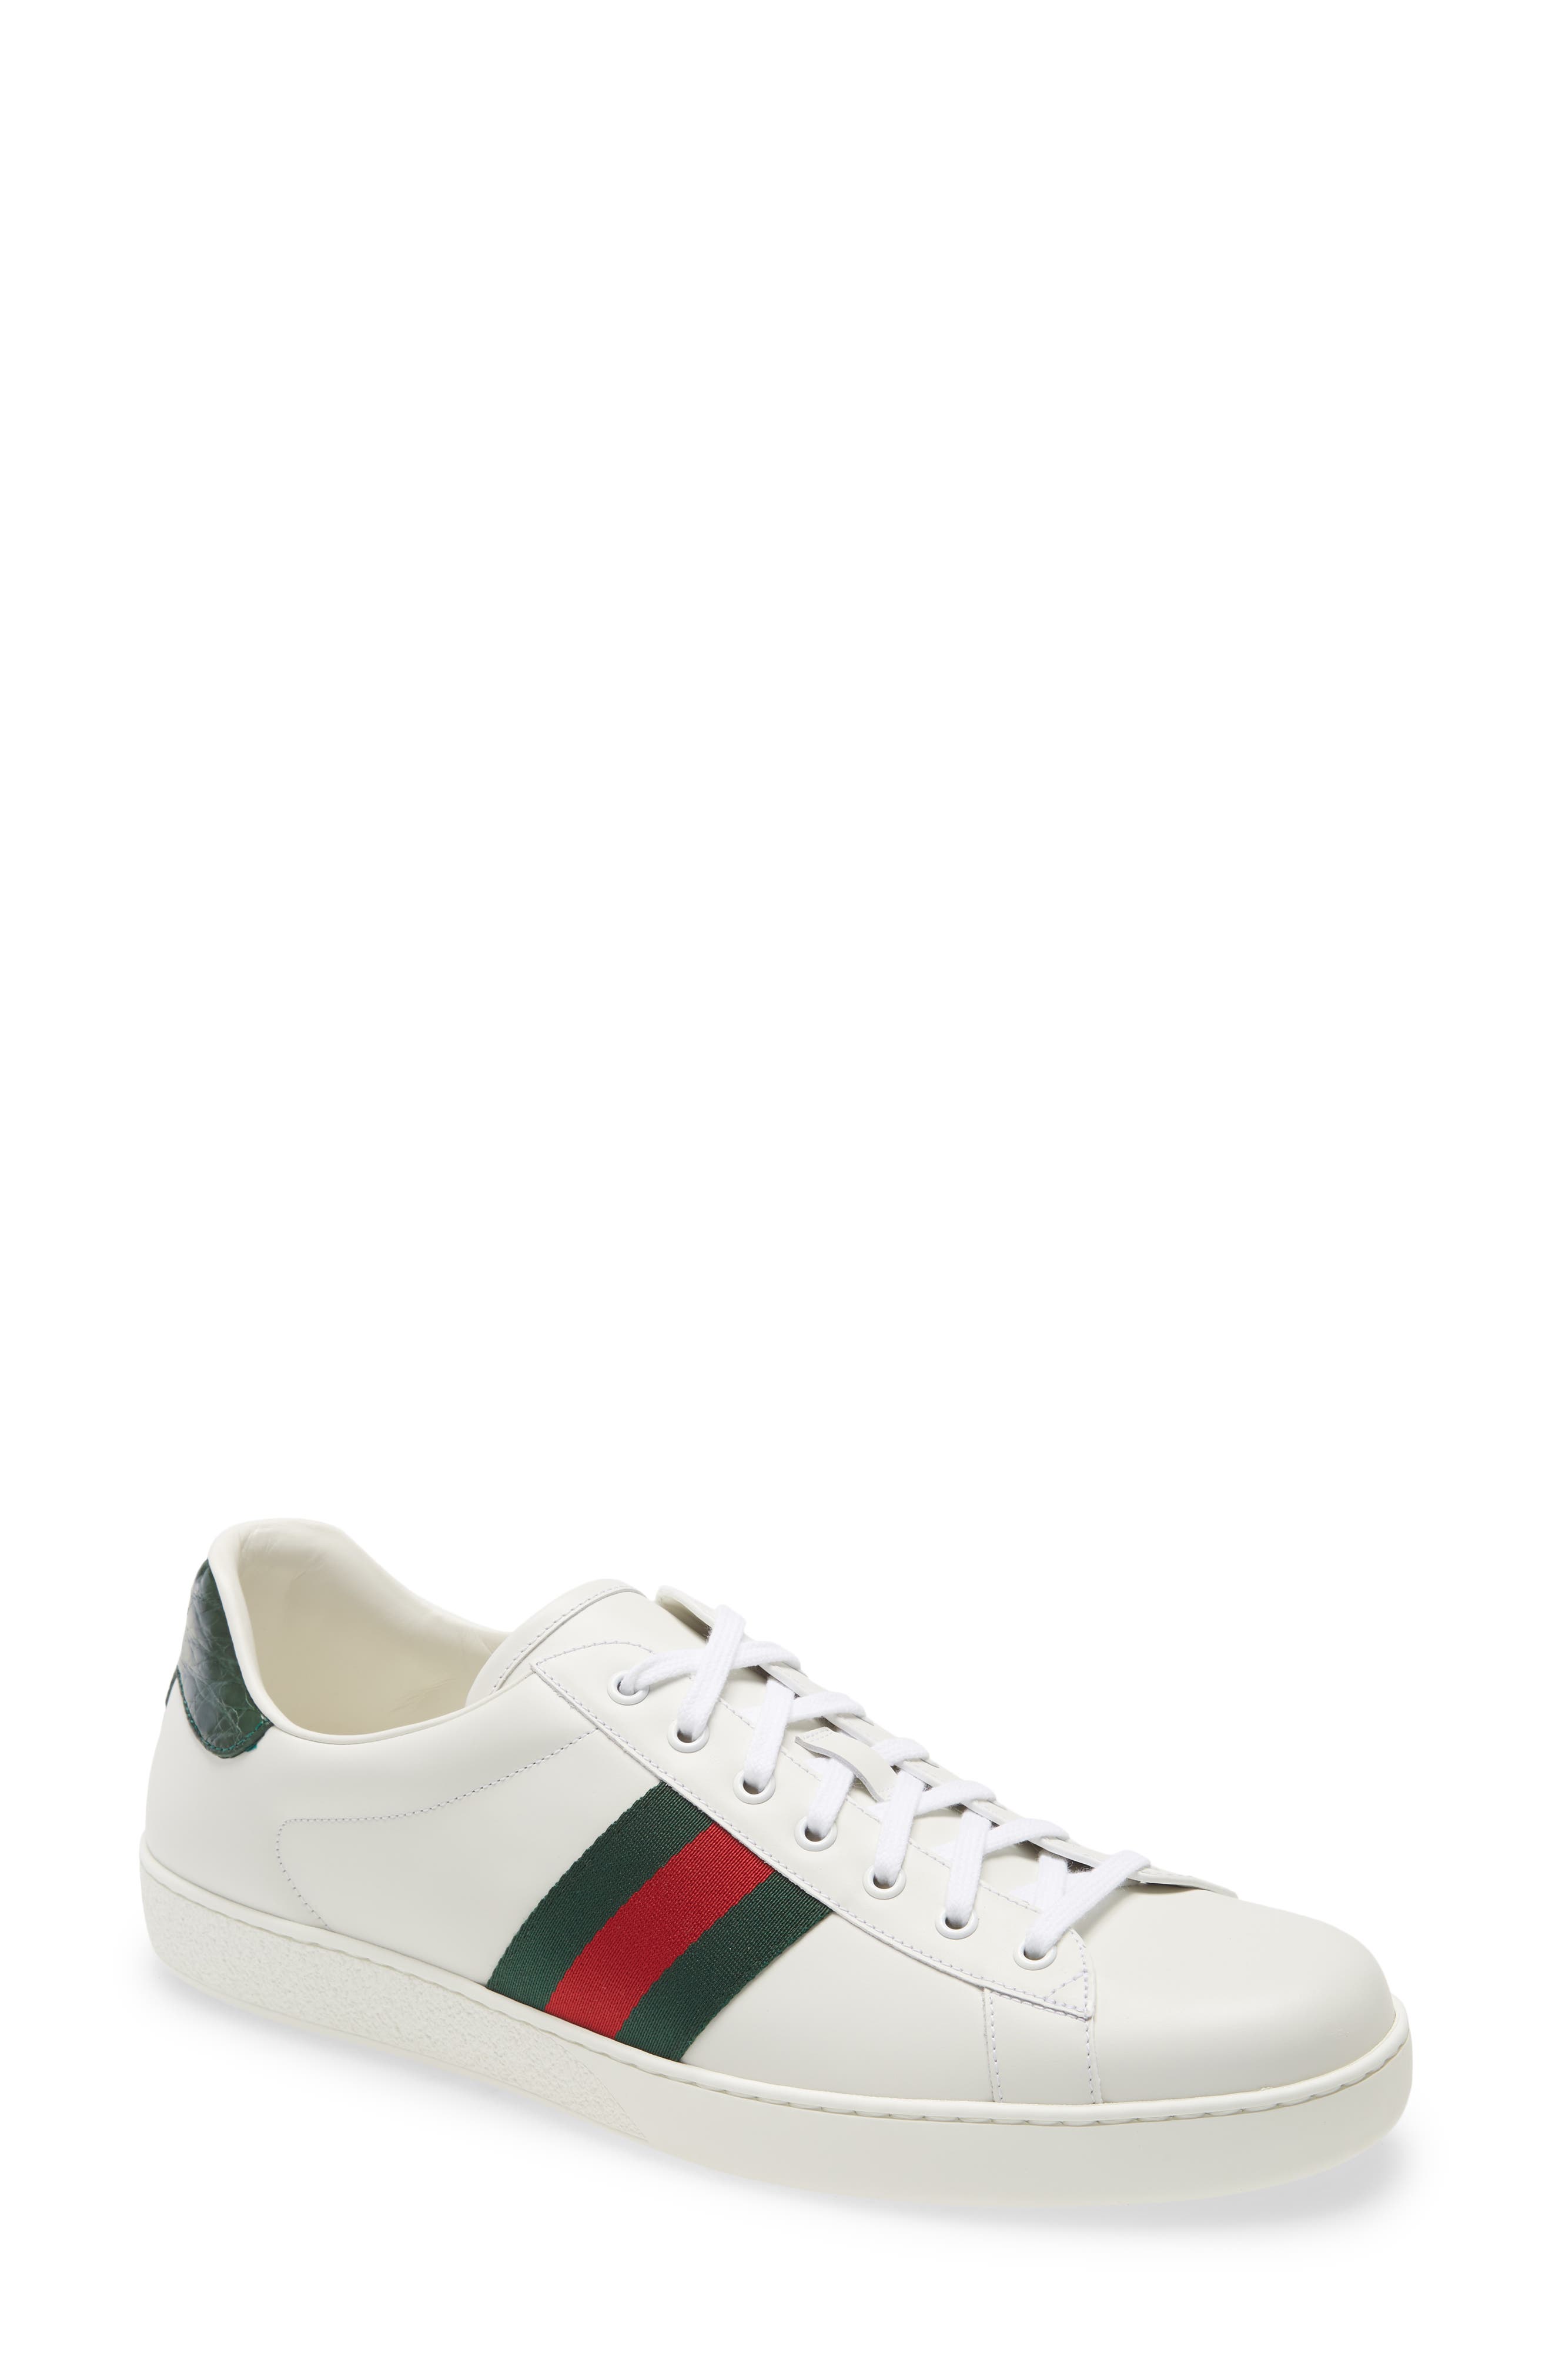 gucci belly shoes price